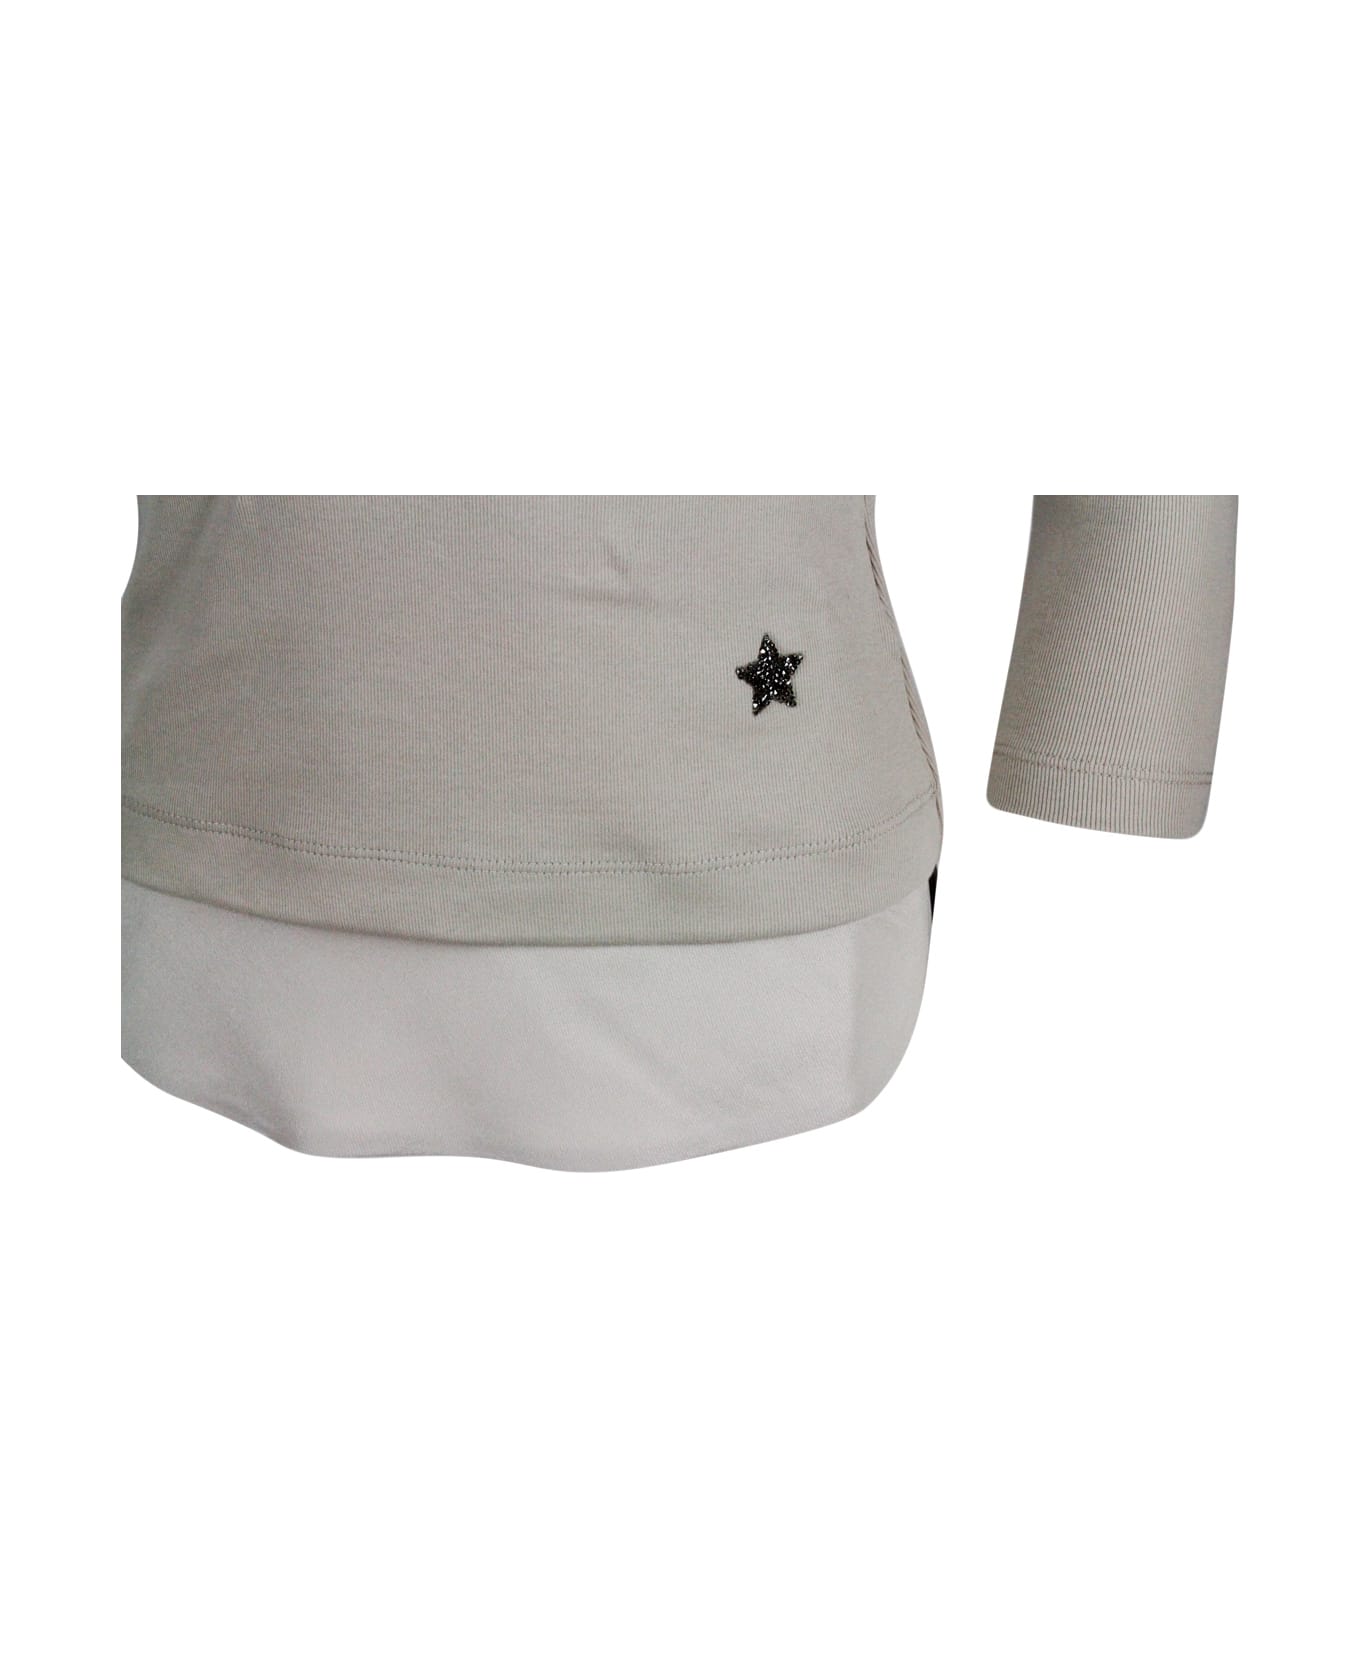 Lorena Antoniazzi Ribbed Crew-neck Short-sleeved Cotton T-shirt With Swarosky Star And Silk Insert On The Bottom - Beige